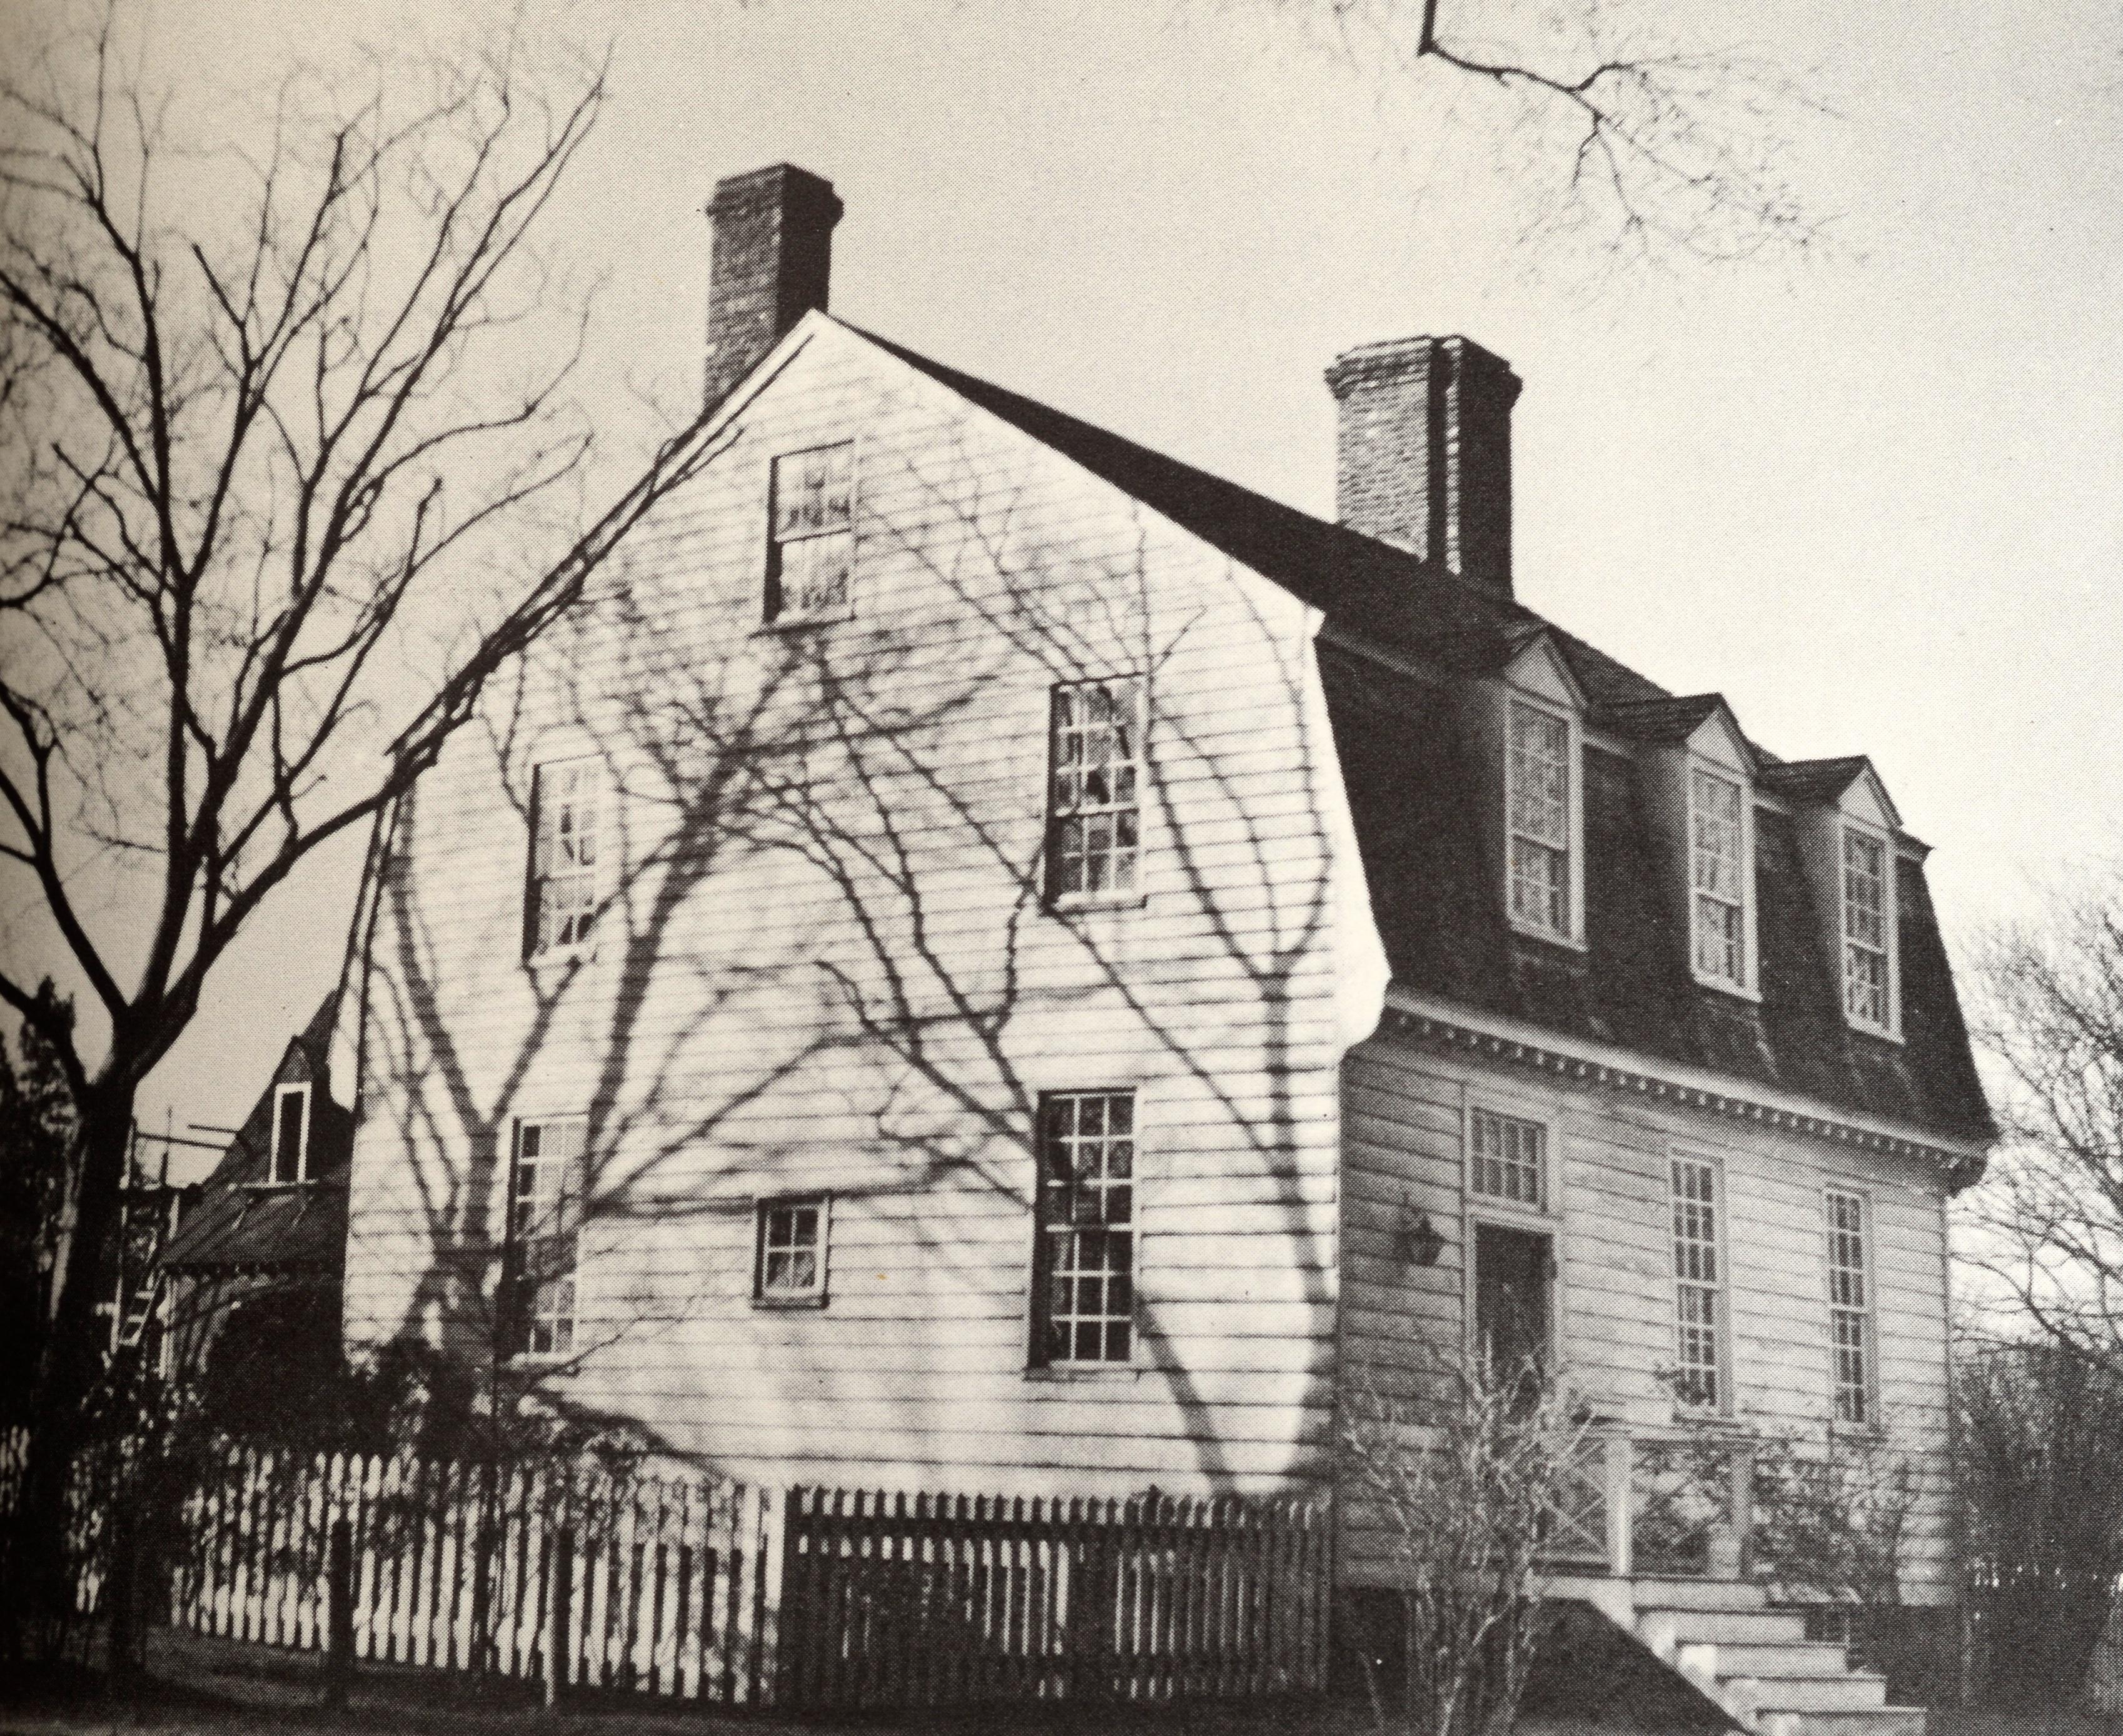 Mid-20th Century Old American Houses 1700-1850 How to Restore, Remodel, and Reproduce Them